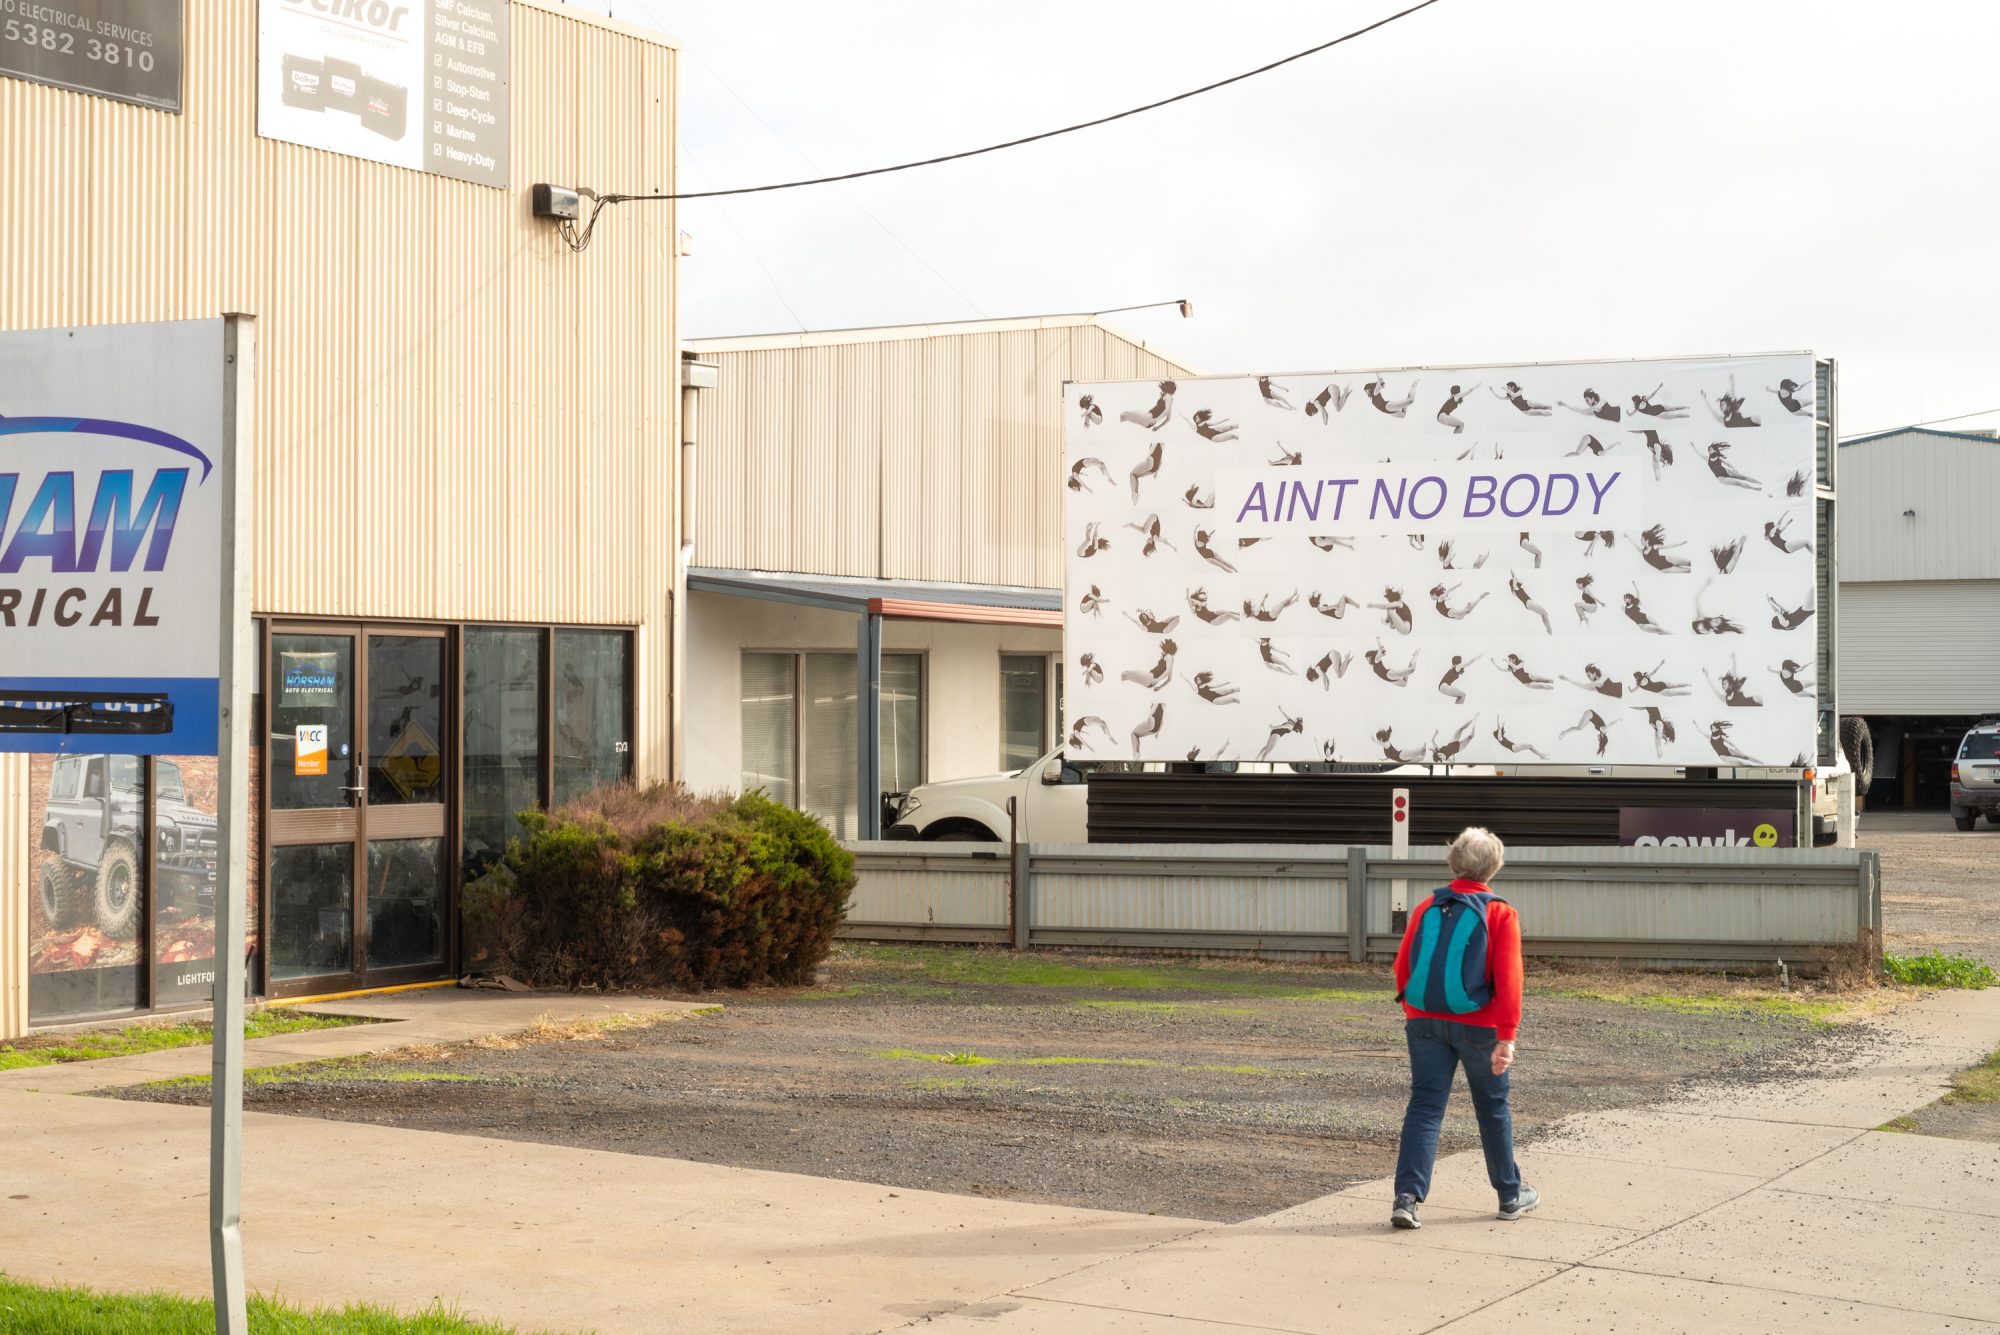 Image Description: A billboard with a black and white tiled images of the artist in a black leotard with long dark hair falling or jumping through the air, against a white background. Overlaid text reads ‘AINT NO BODY.’ The billboard is in an industrial area.